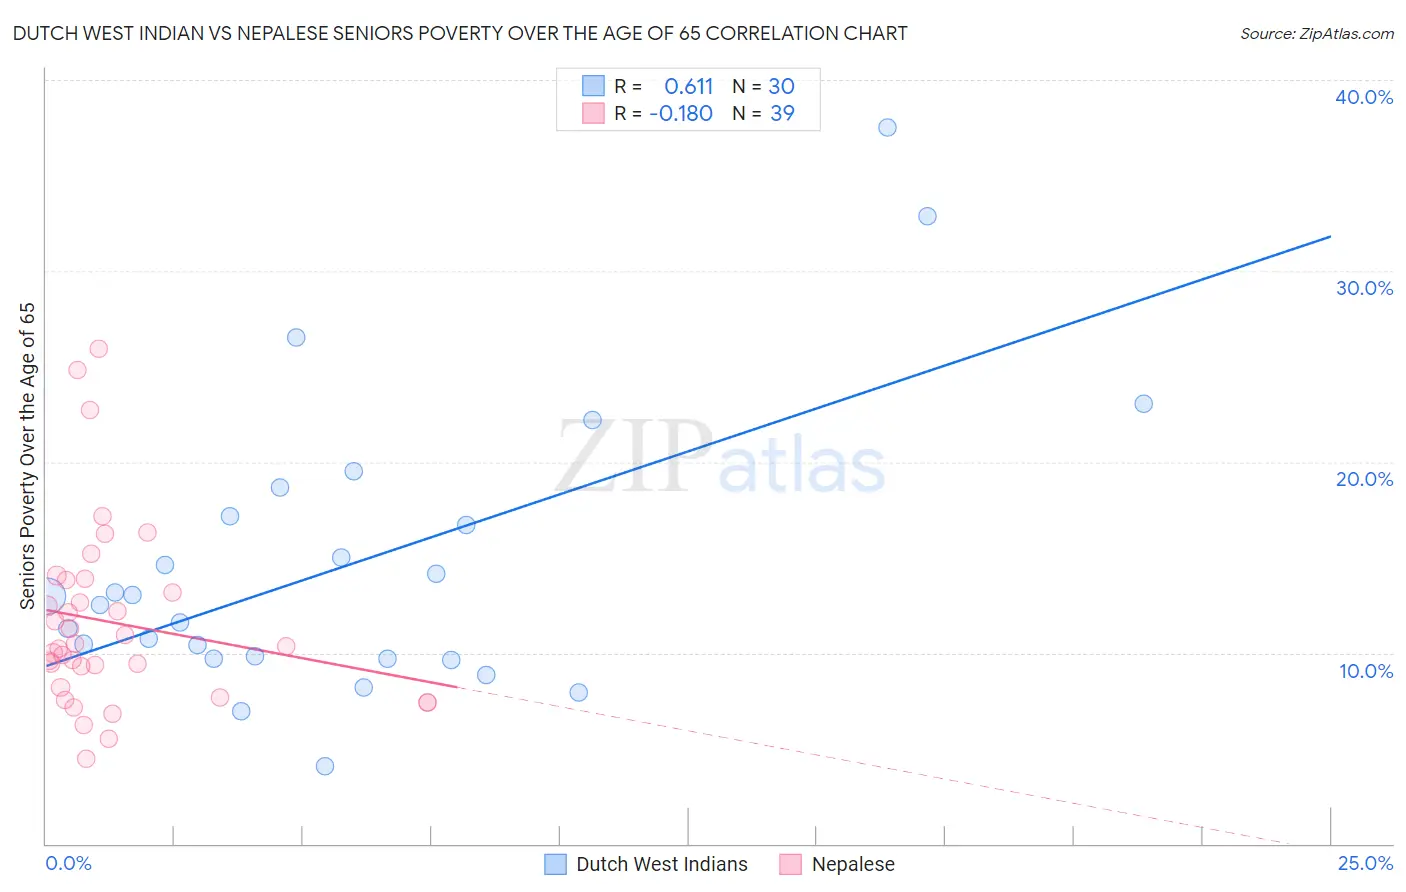 Dutch West Indian vs Nepalese Seniors Poverty Over the Age of 65